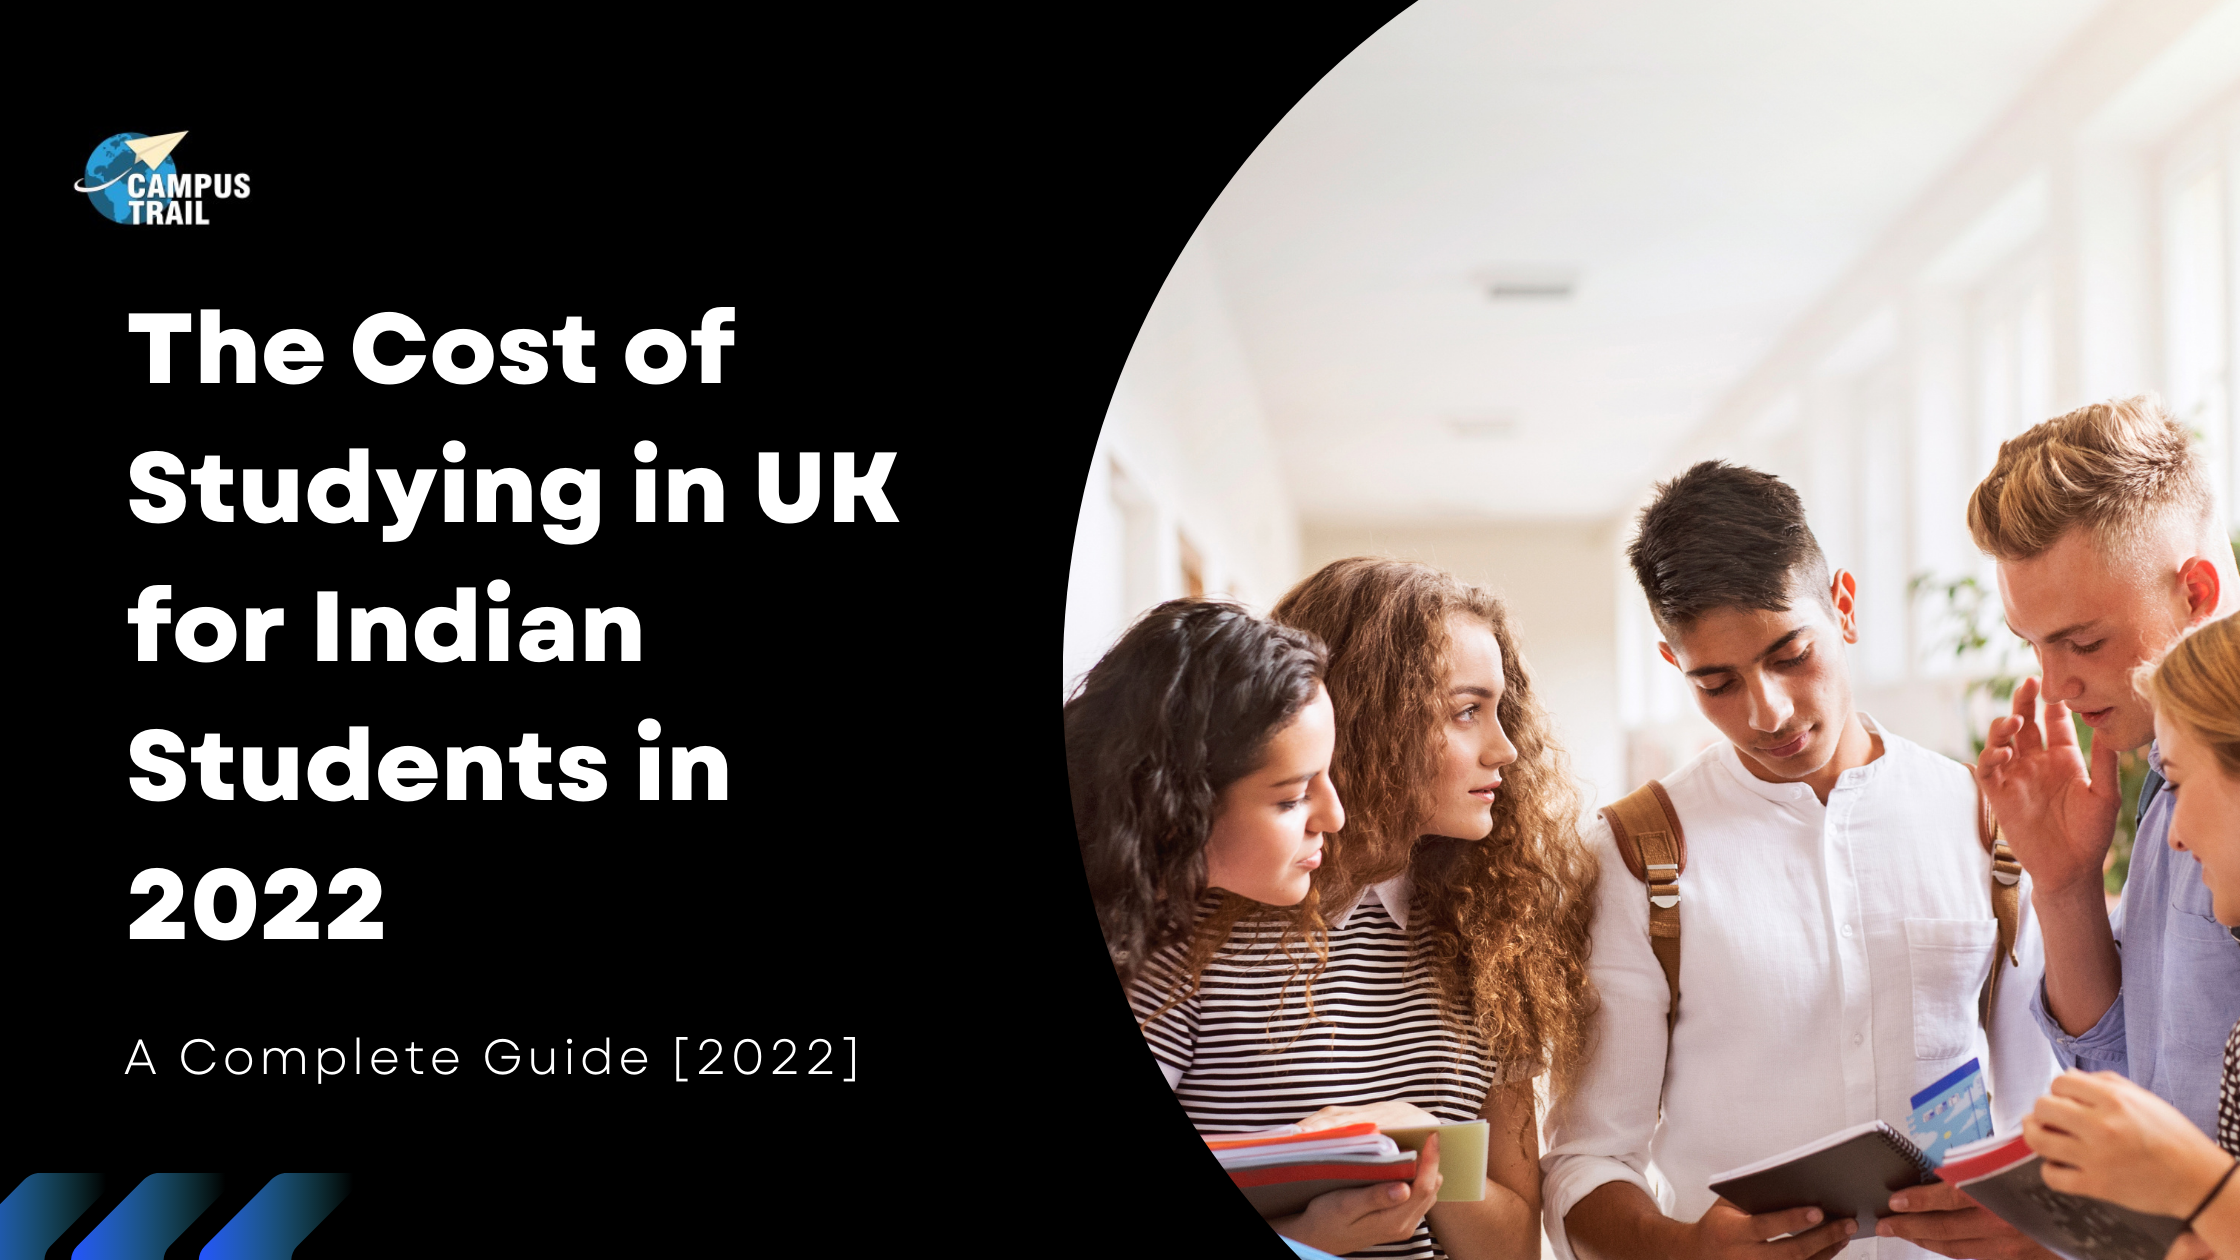 The Cost of Studying in UK for Indian Students in 2022